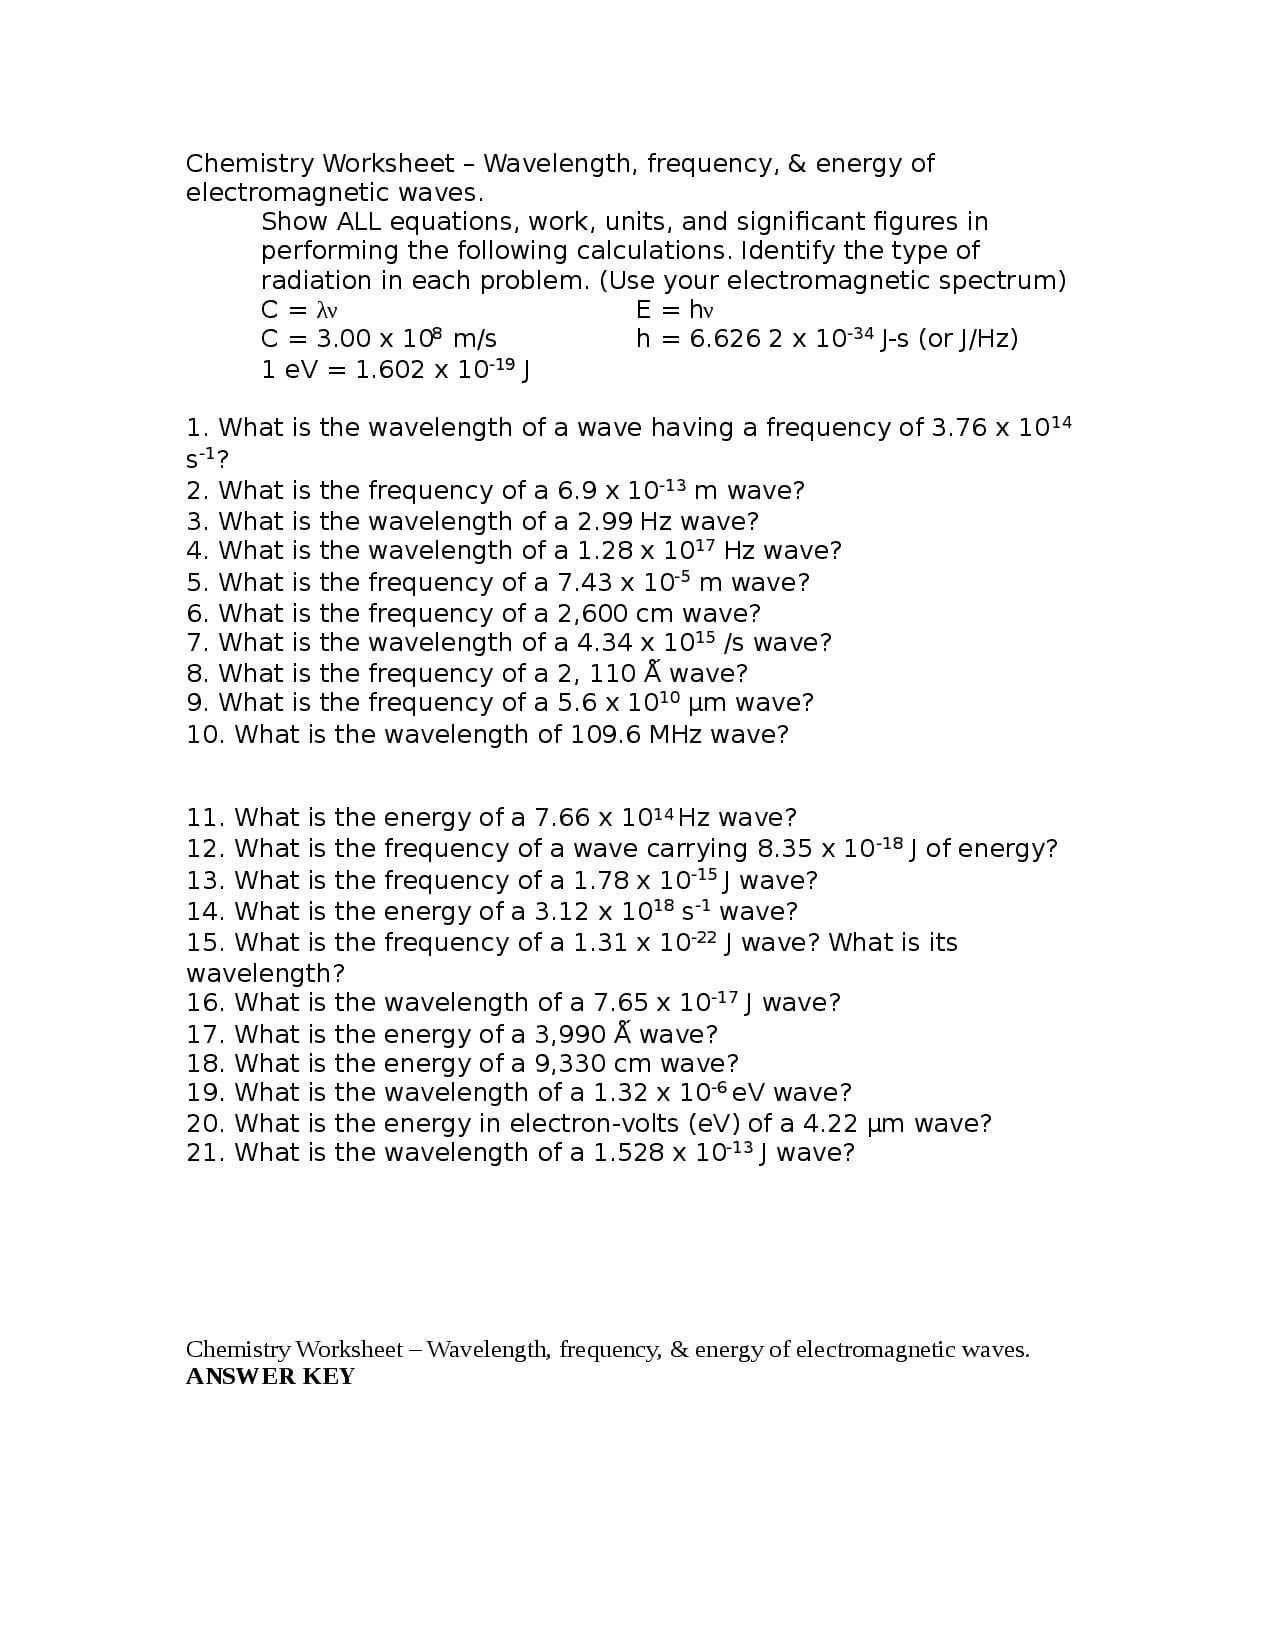 Electromagnetic Waves  Worksheet  Docsity Also Chemistry Worksheet Wavelength Frequency And Energy Of Electromagnetic Waves Key